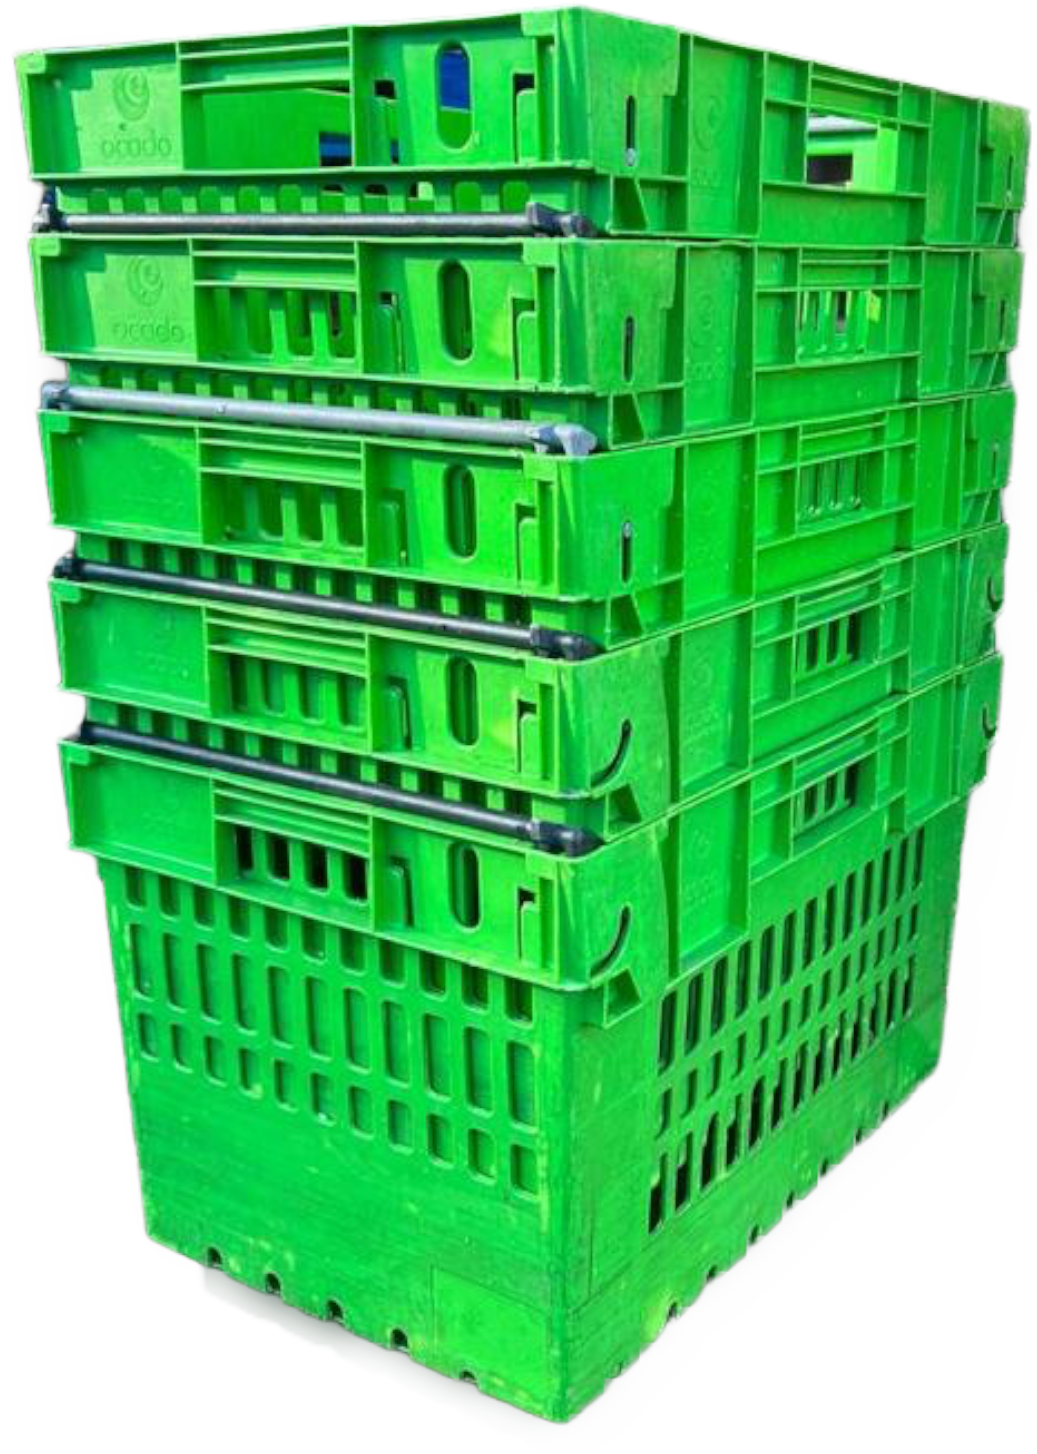 400x300x185 Bale Arm Crate - Black For Food Distribution